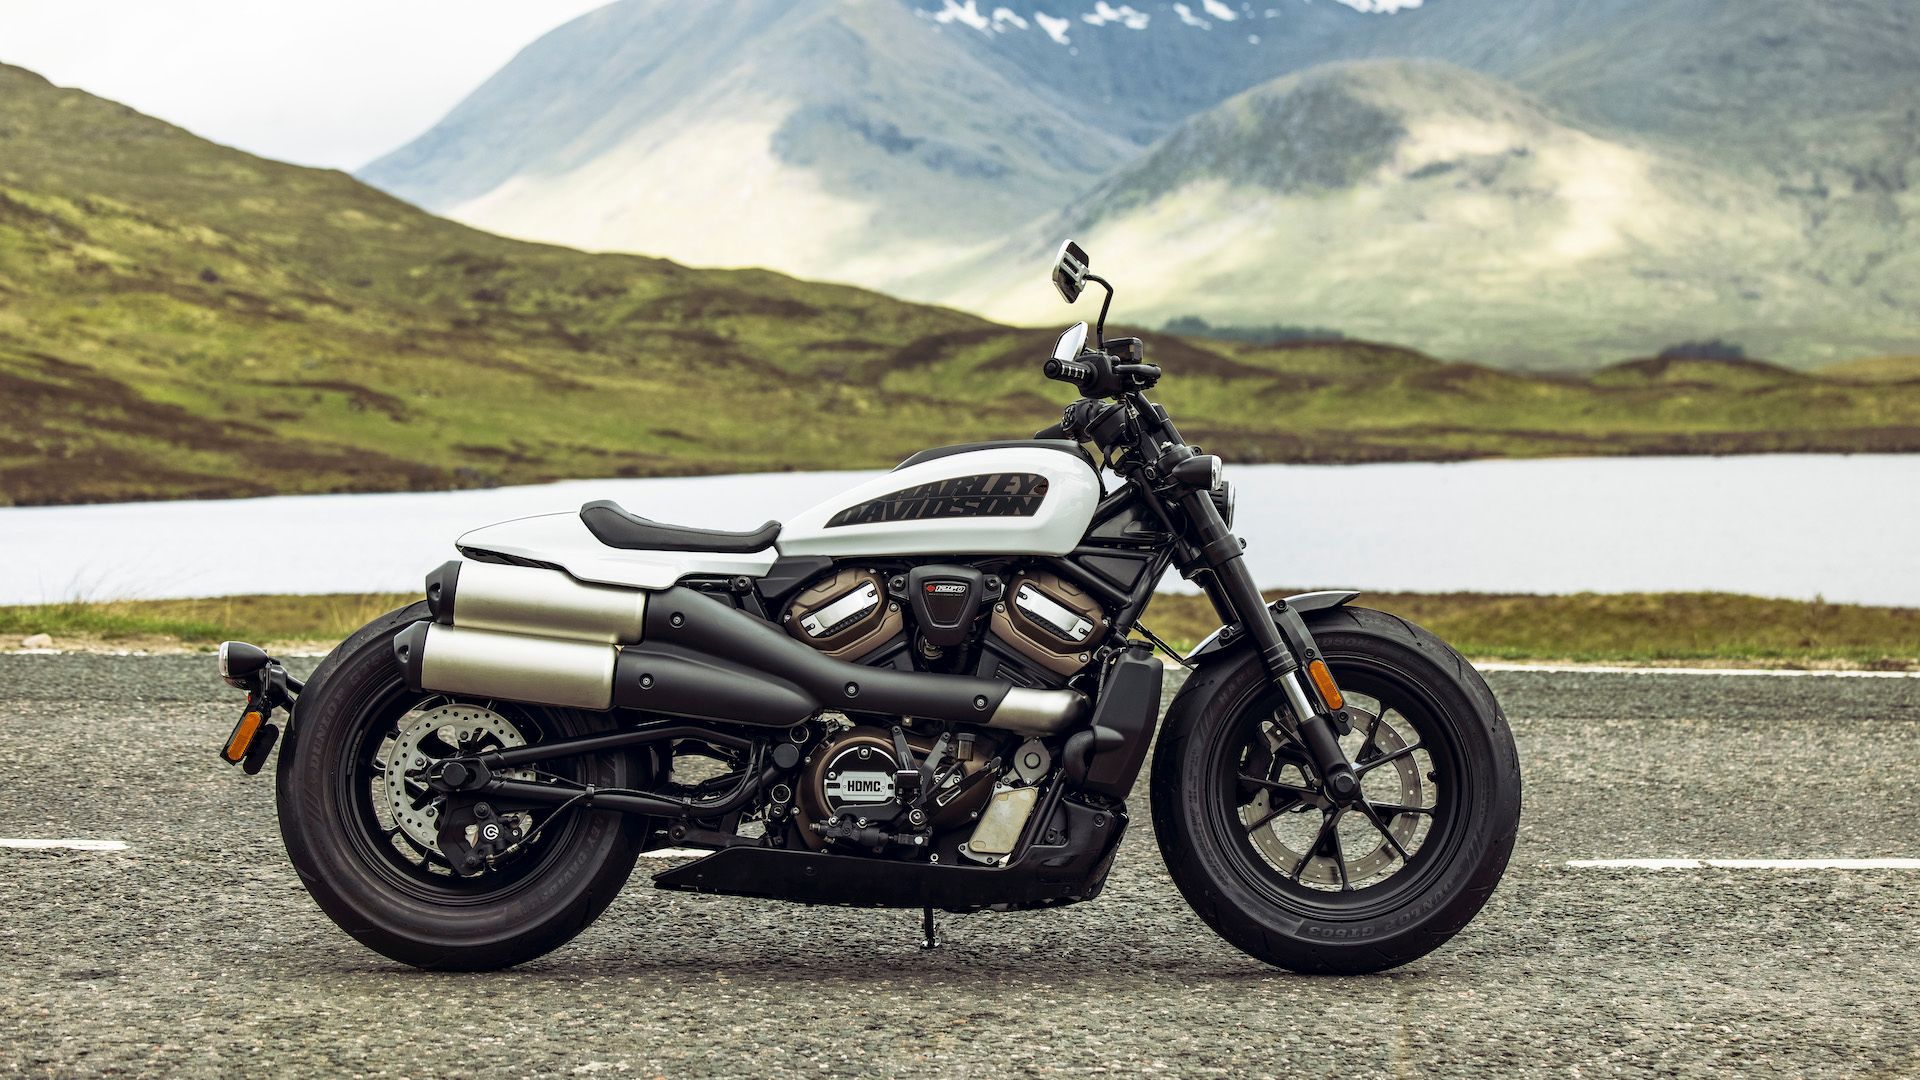 10 Things You Should Know About The HarleyDavidson Sportster S